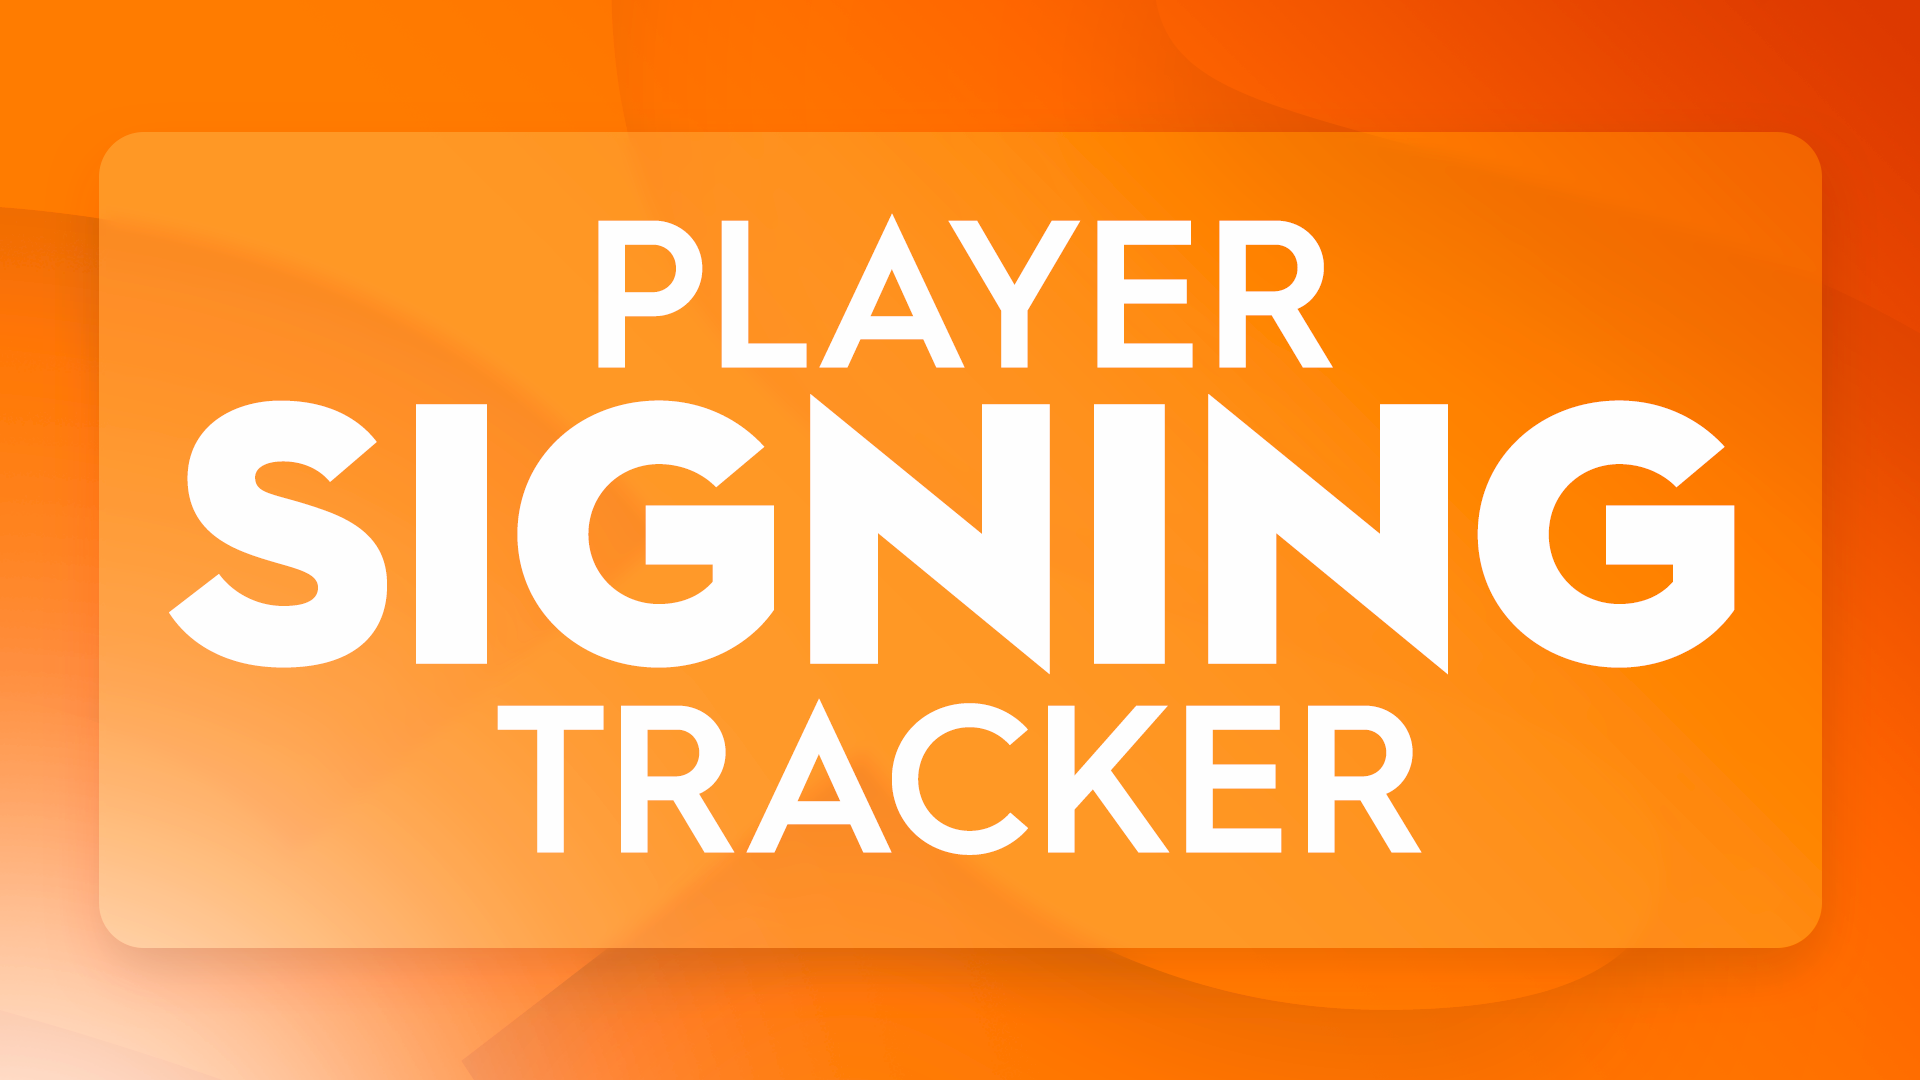 USL Super League Player Signing Tracker featured image